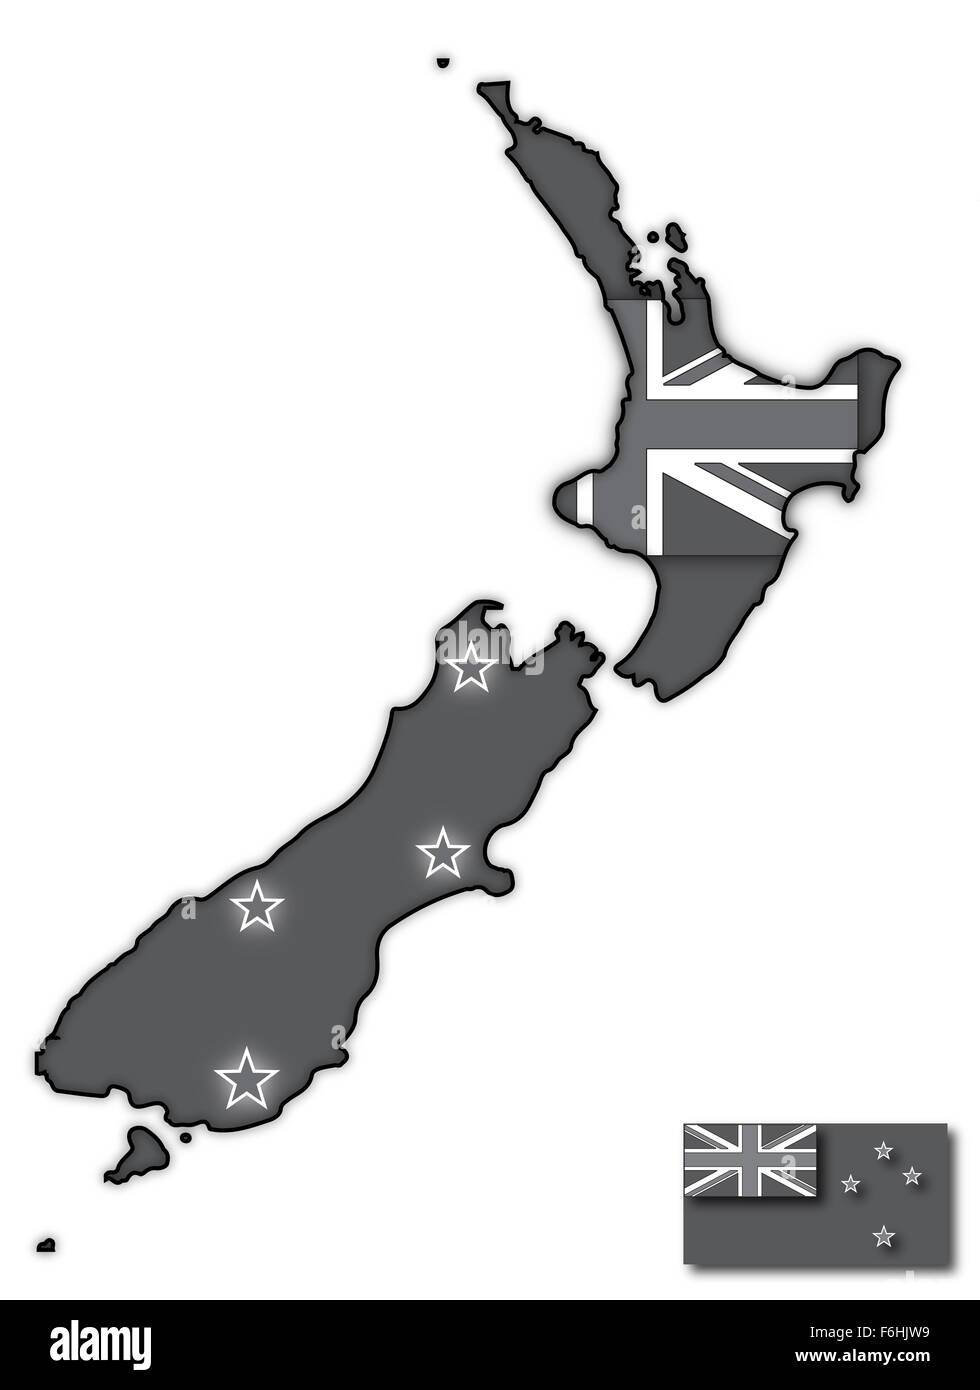 A grey New Zealand map with a flag design inside isolated on a white background Stock Photo